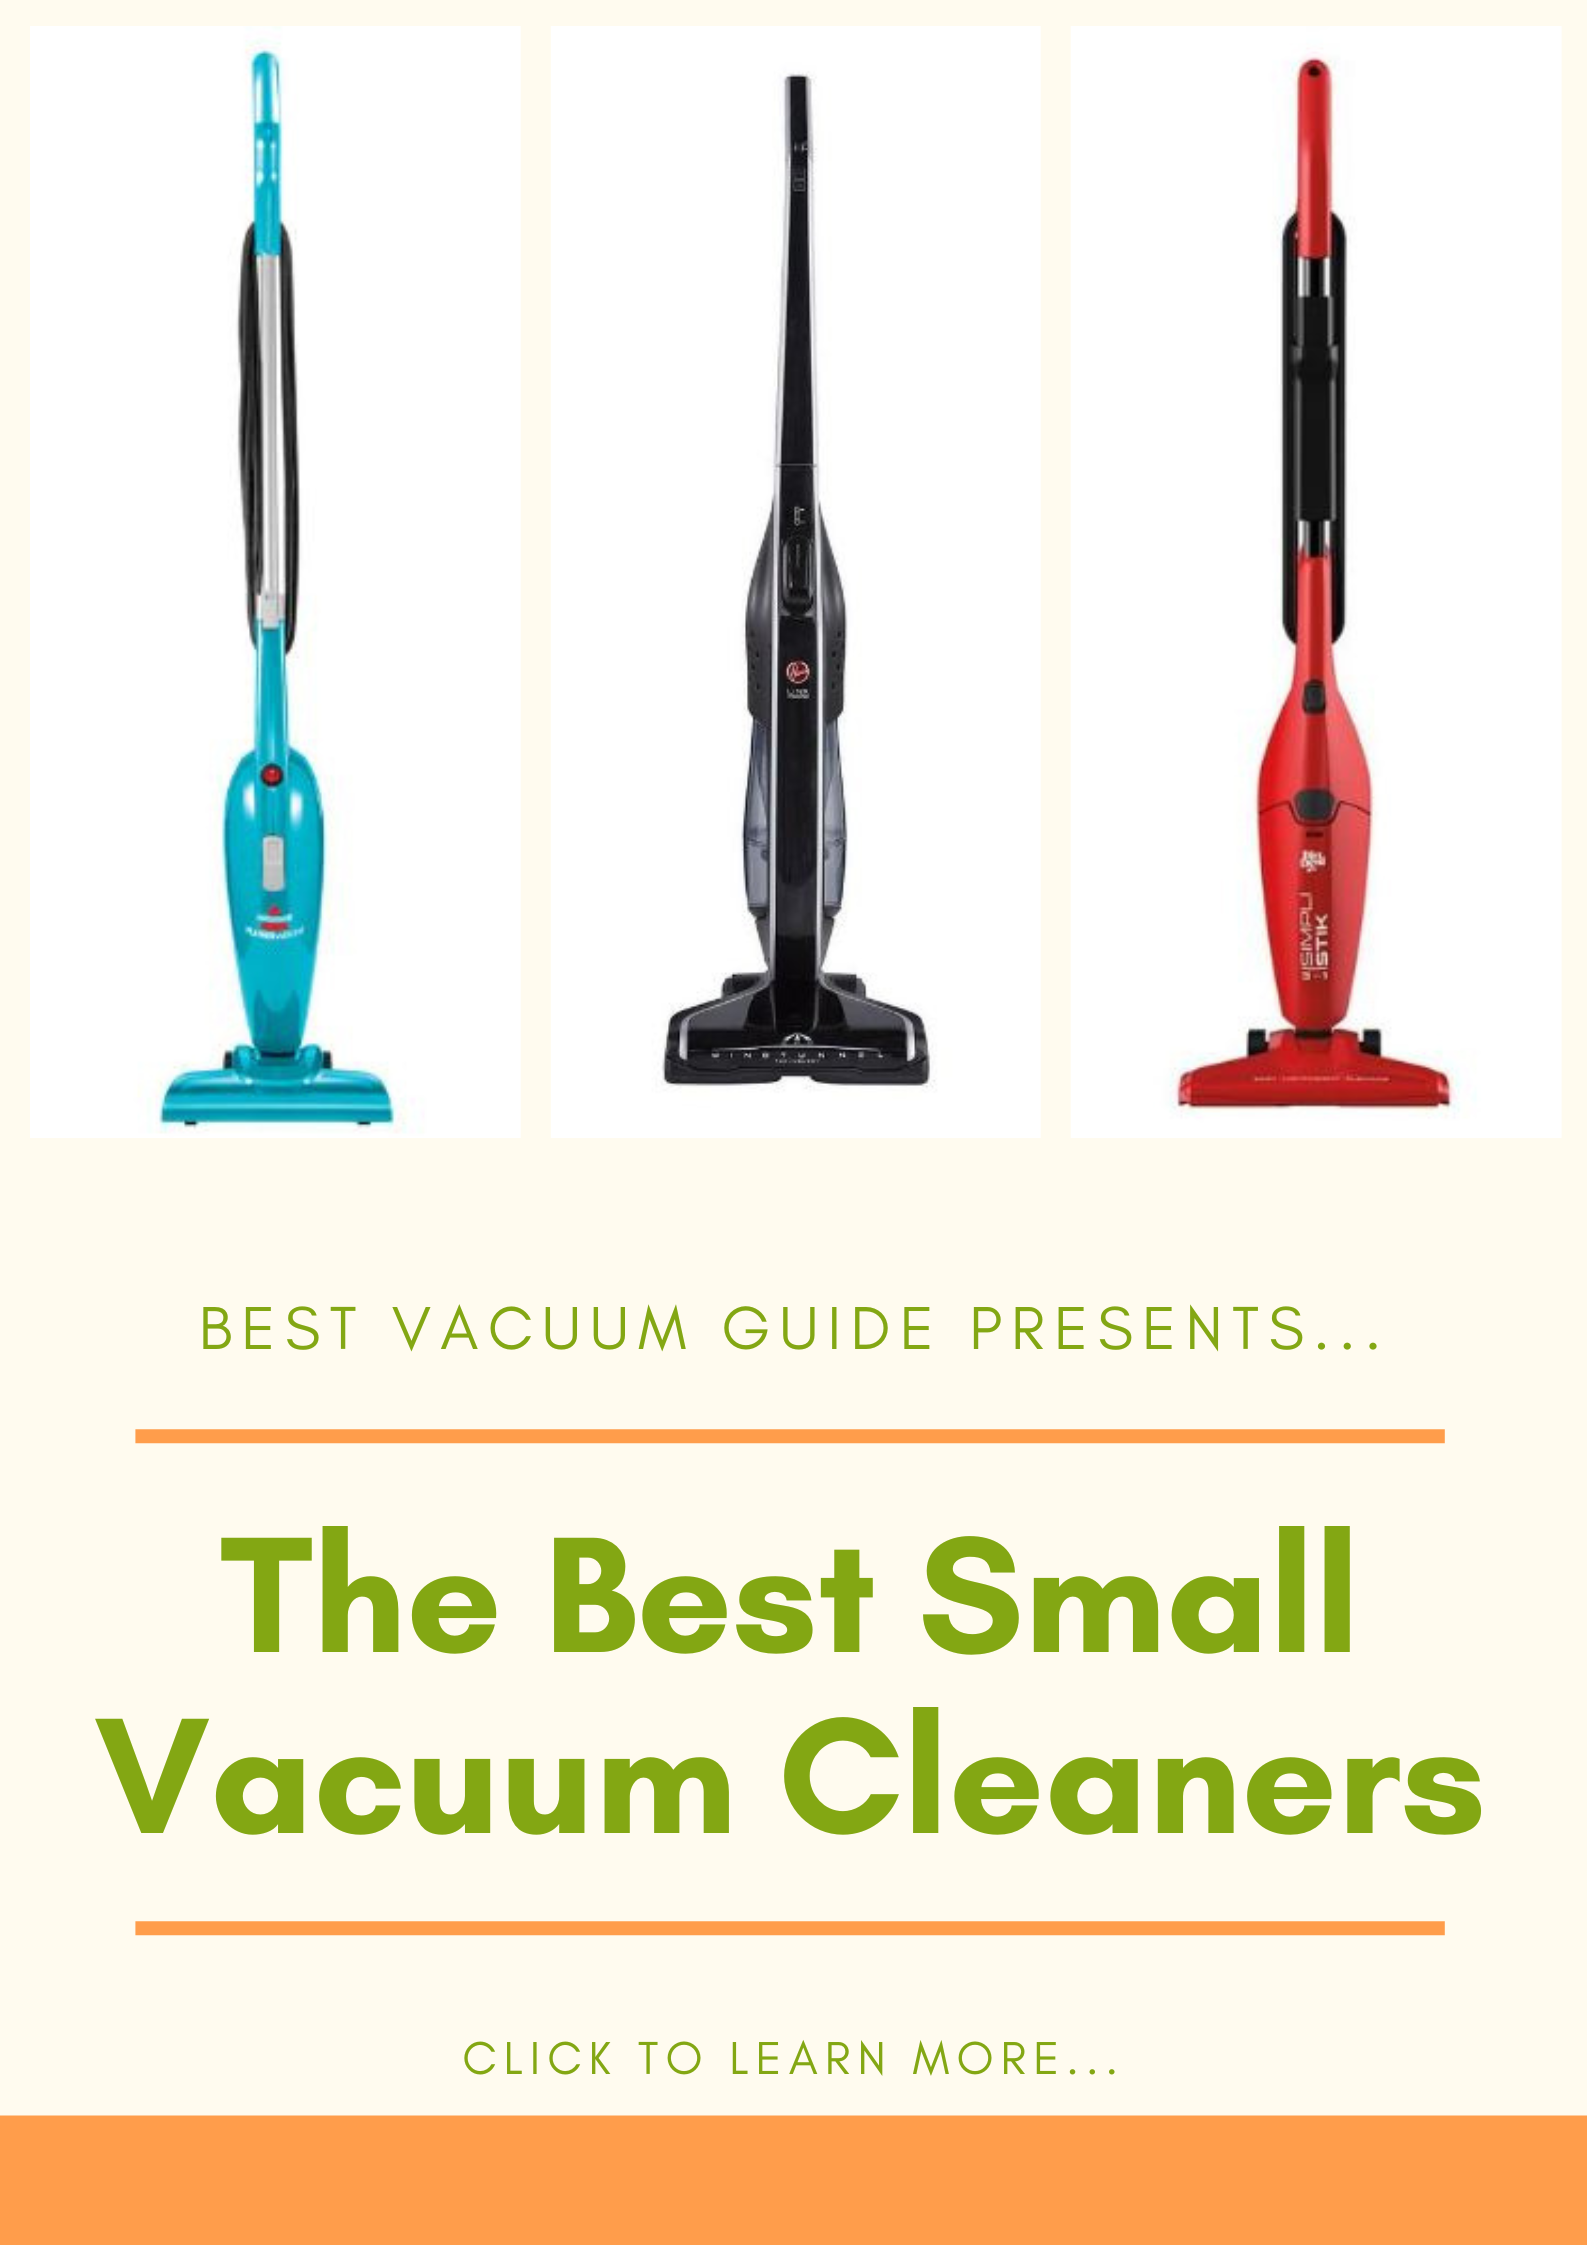 Best small vacuum cleaners